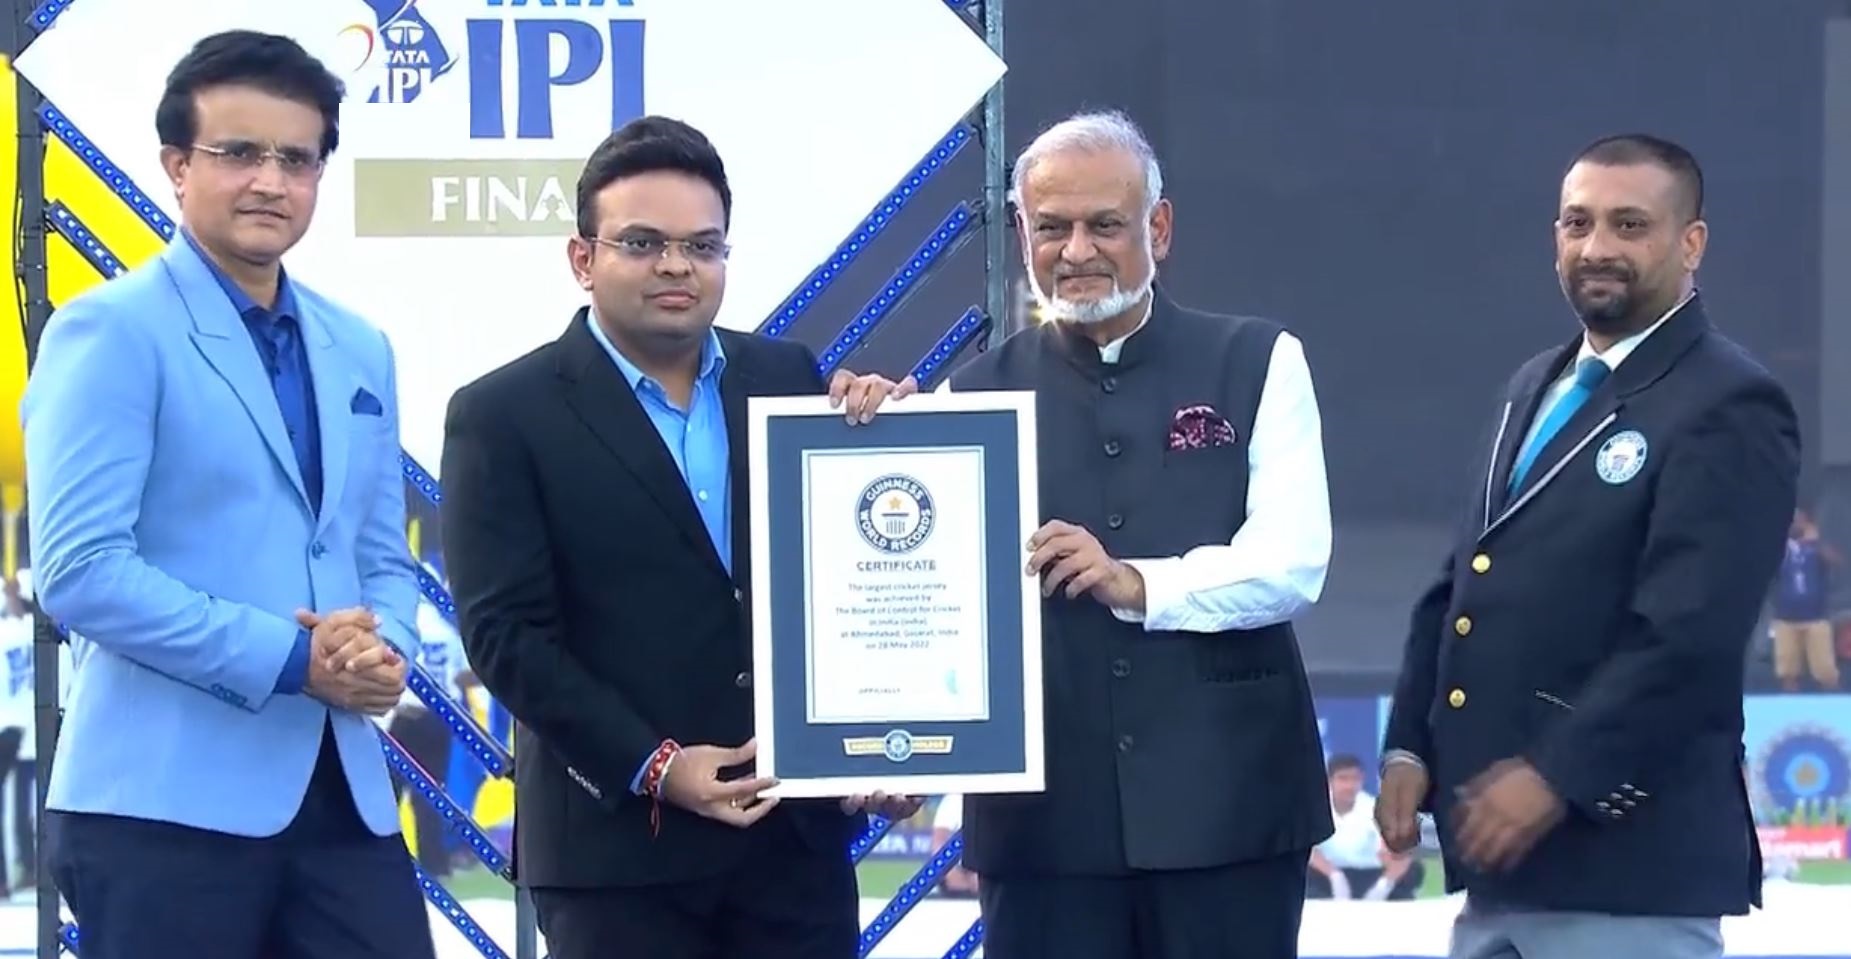 BCCI and IPL officials receiving the Guinness World Record certificate | IPL